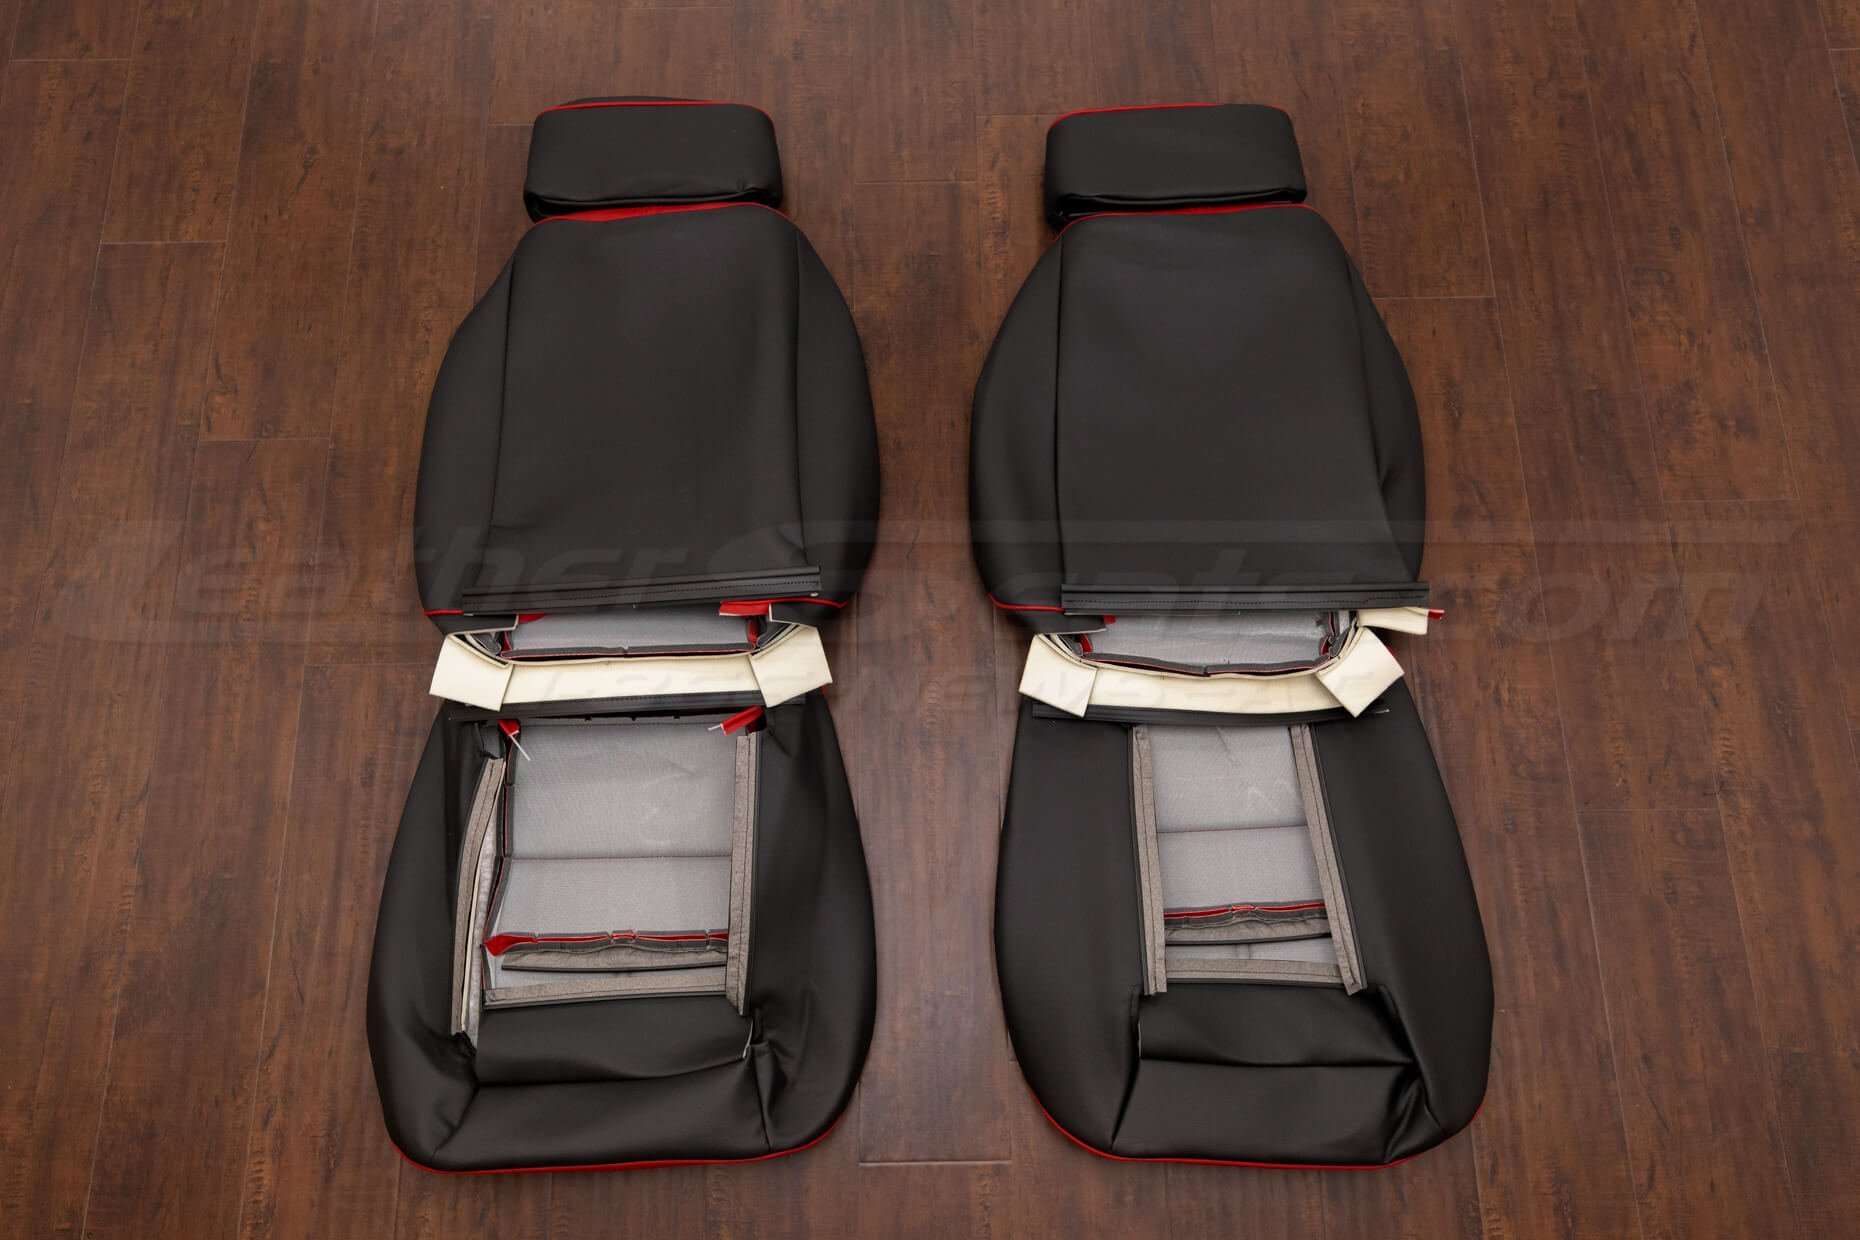 88-92 Chevrolet Camaro Upholstery Kit - Black & Bright Red - Back of front seats